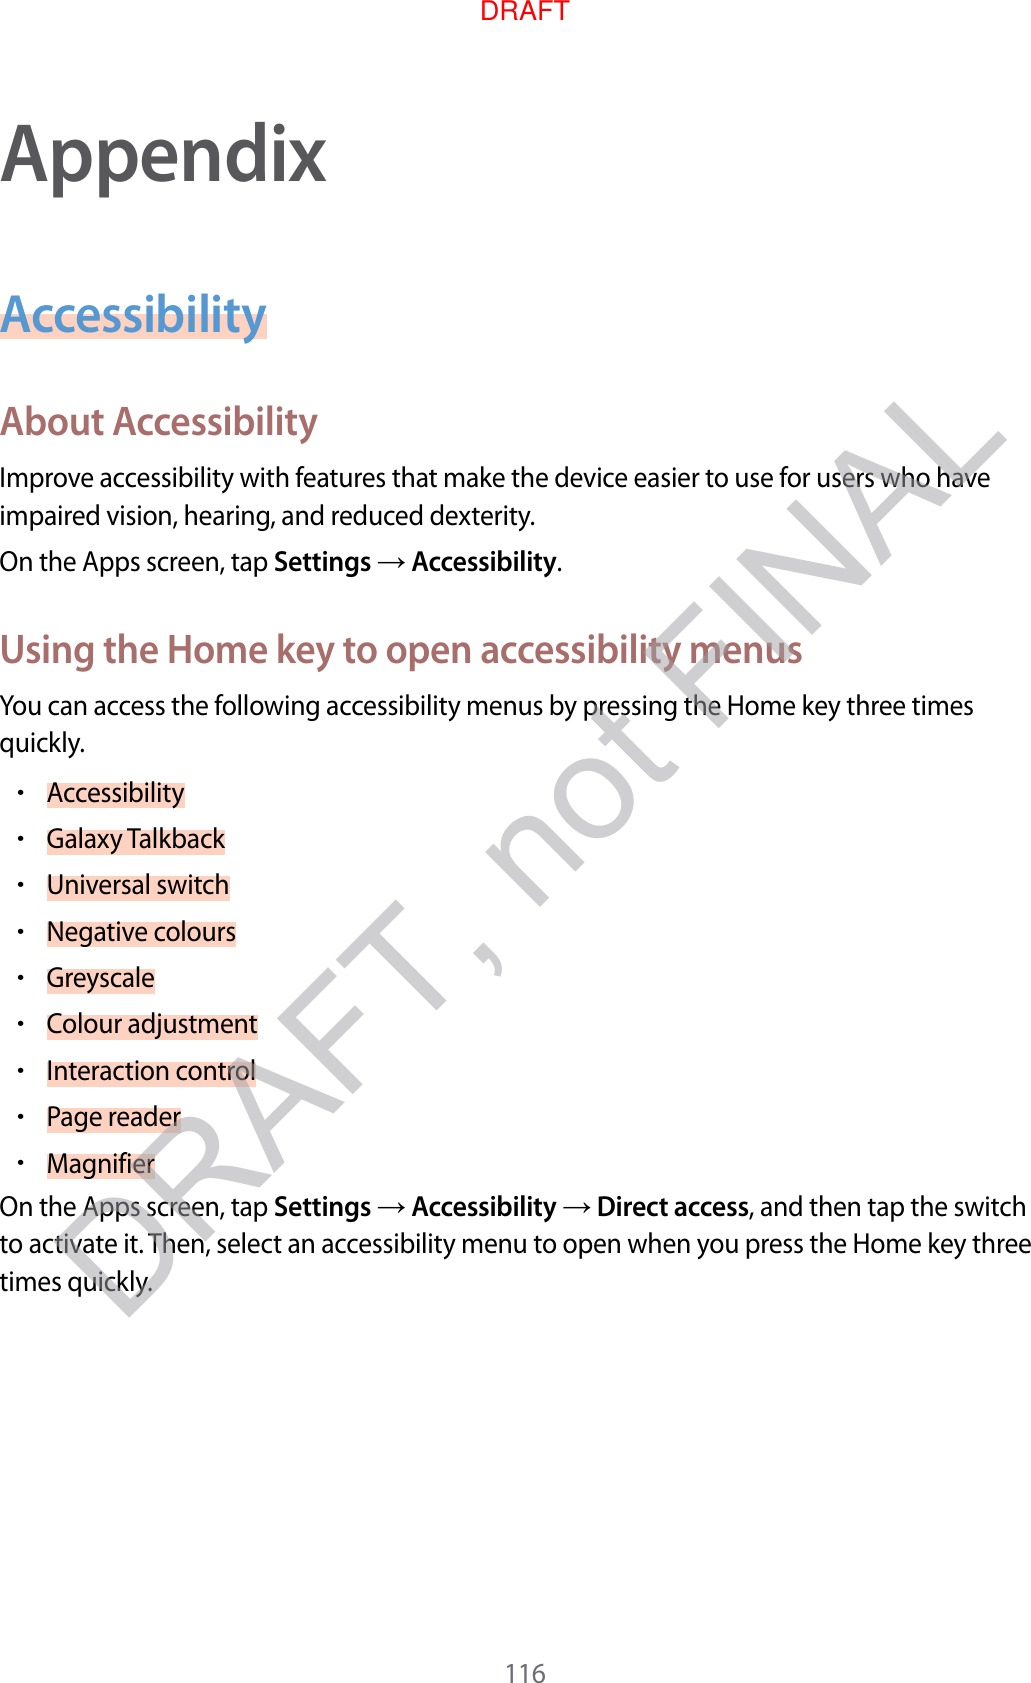 116AppendixAccessibilityAbout AccessibilityImprove accessibility with features that make the device easier to use for users who have impaired vision, hearing, and reduced dexterity.On the Apps screen, tap Settings  Accessibility.Using the Home key to open accessibility menusYou can access the following accessibility menus by pressing the Home key three times quickly.•Accessibility•Galaxy Talkback•Universal switch•Negative colours•Greyscale•Colour adjustment•Interaction control•Page reader•MagnifierOn the Apps screen, tap Settings  Accessibility  Direct access, and then tap the switch to activate it. Then, select an accessibility menu to open when you press the Home key three times quickly.DRAFT, not FINALDRAFT